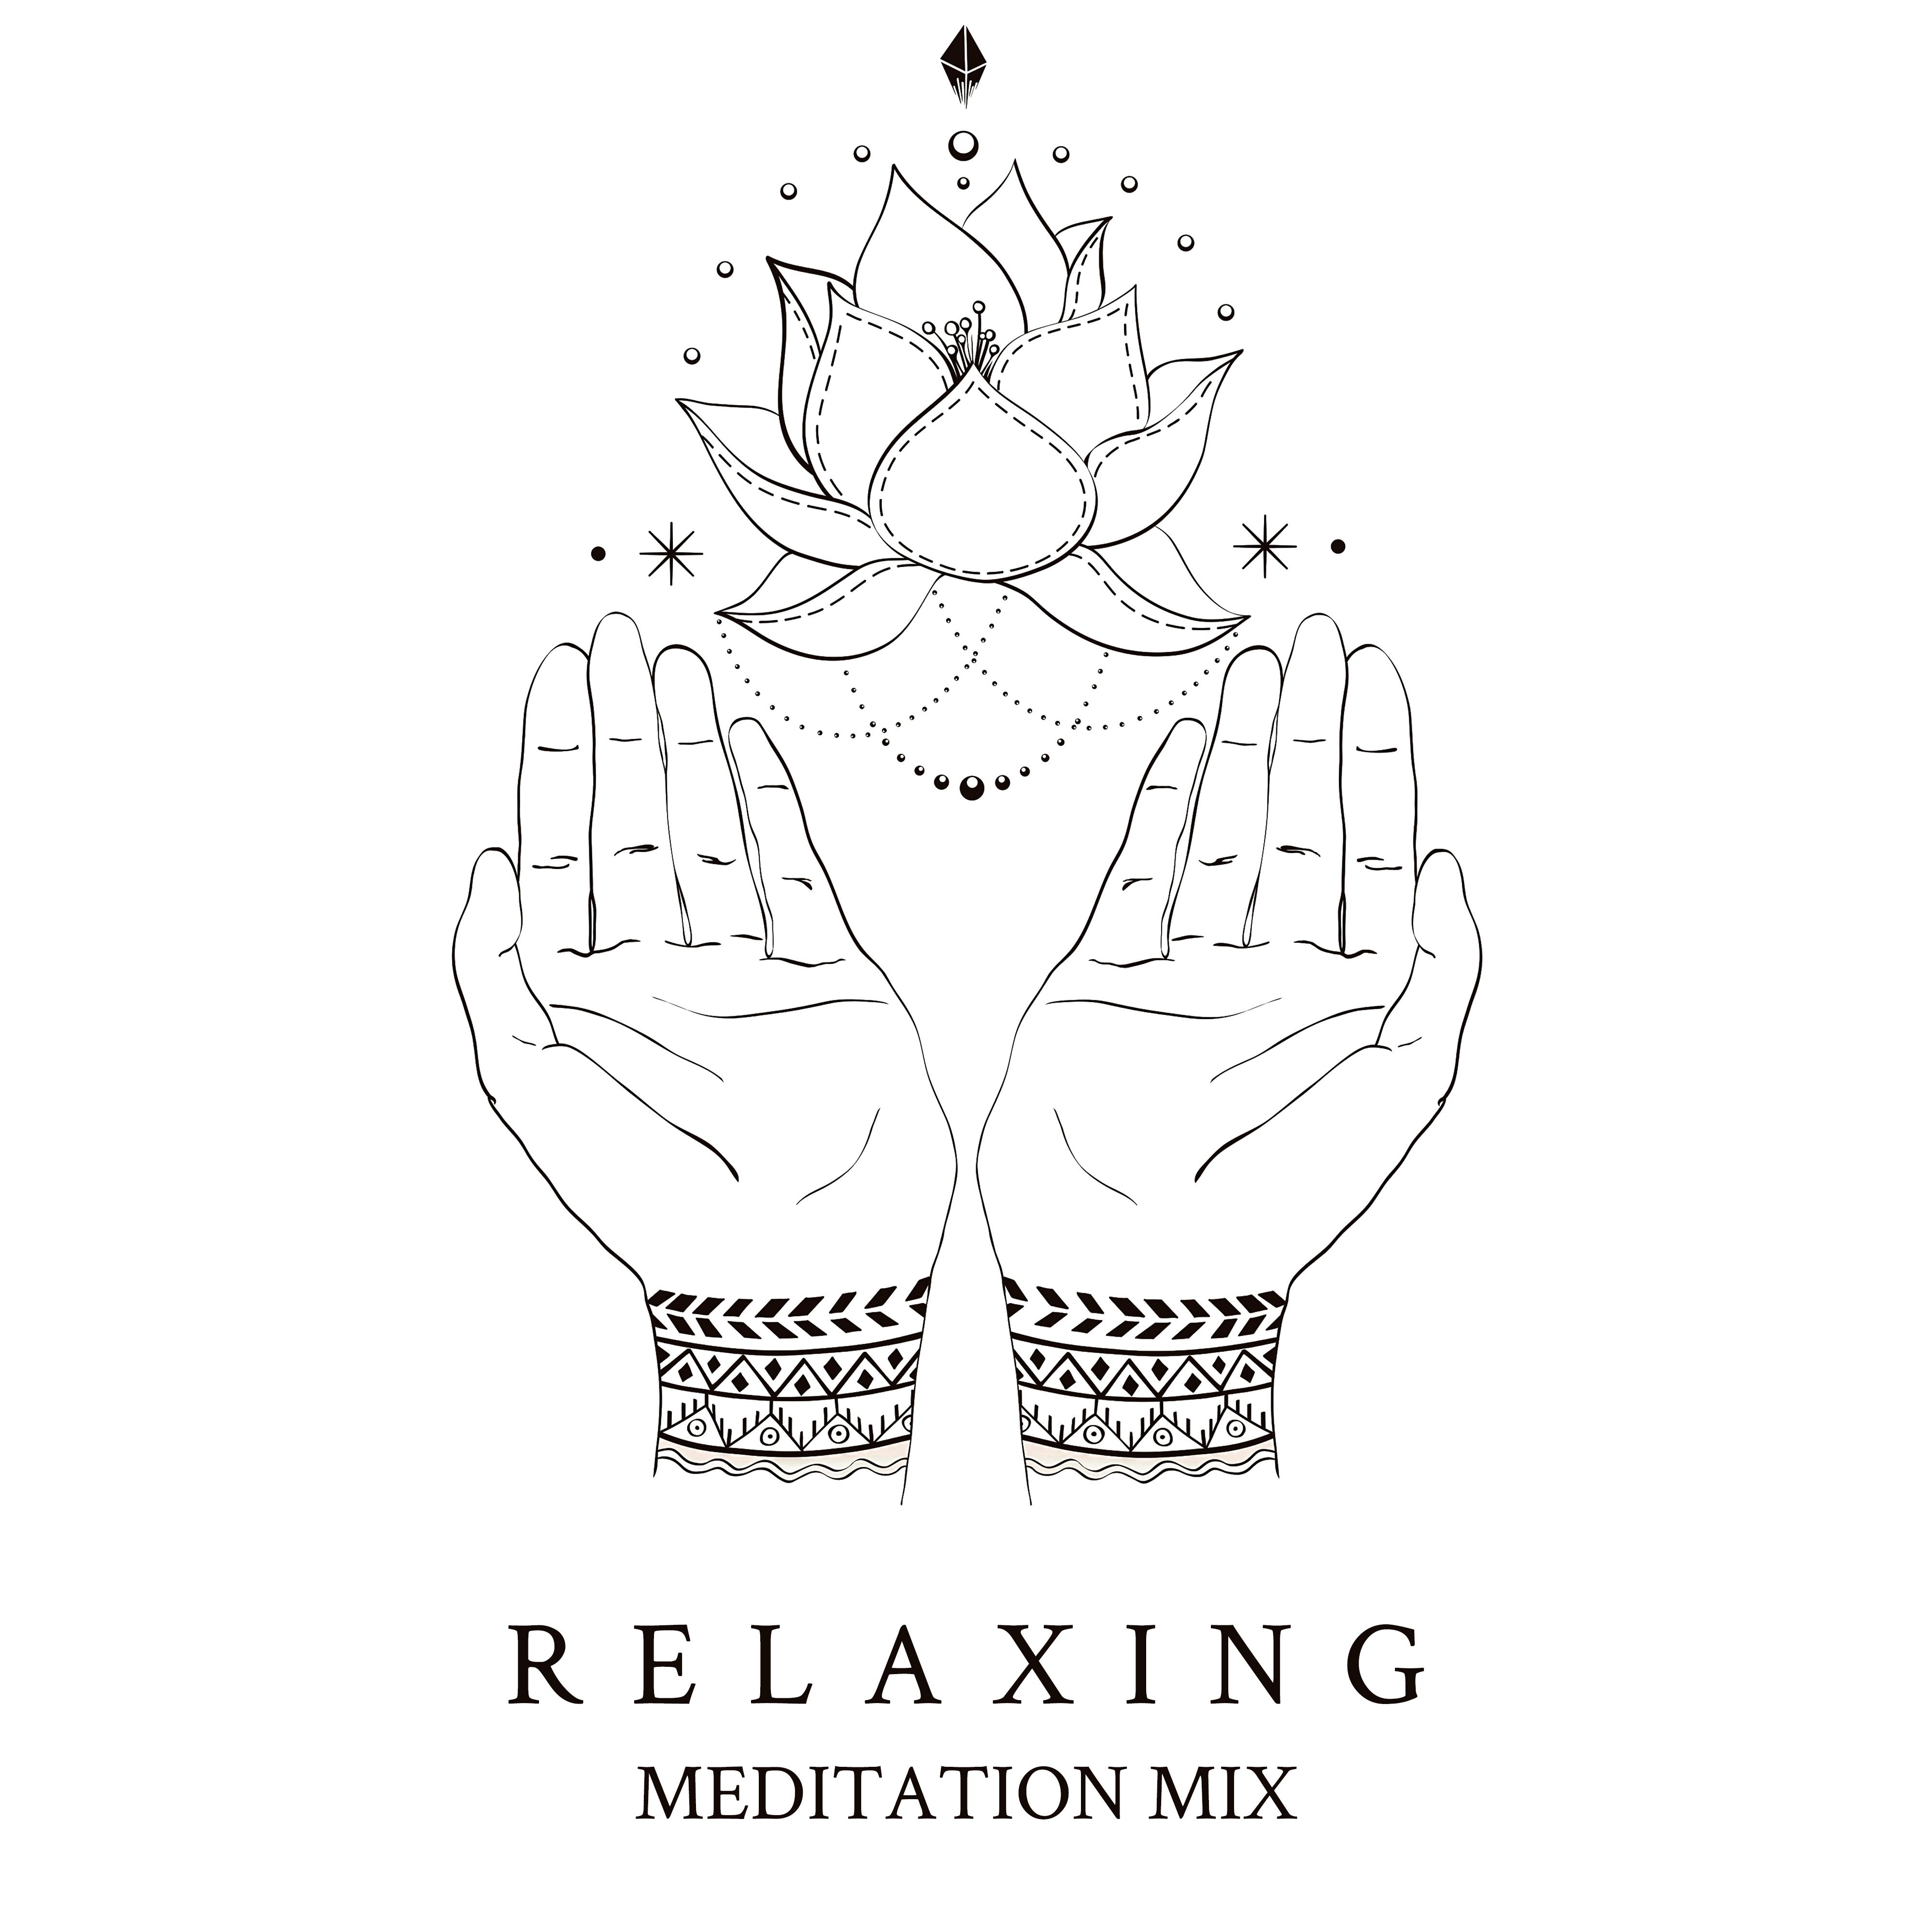 Relaxing Meditation Mix – Healing Relaxing Meditation, Soothing Sounds for Yoga, Relaxation, Inner Harmony, Sleep Thearpy, Ambient Yoga